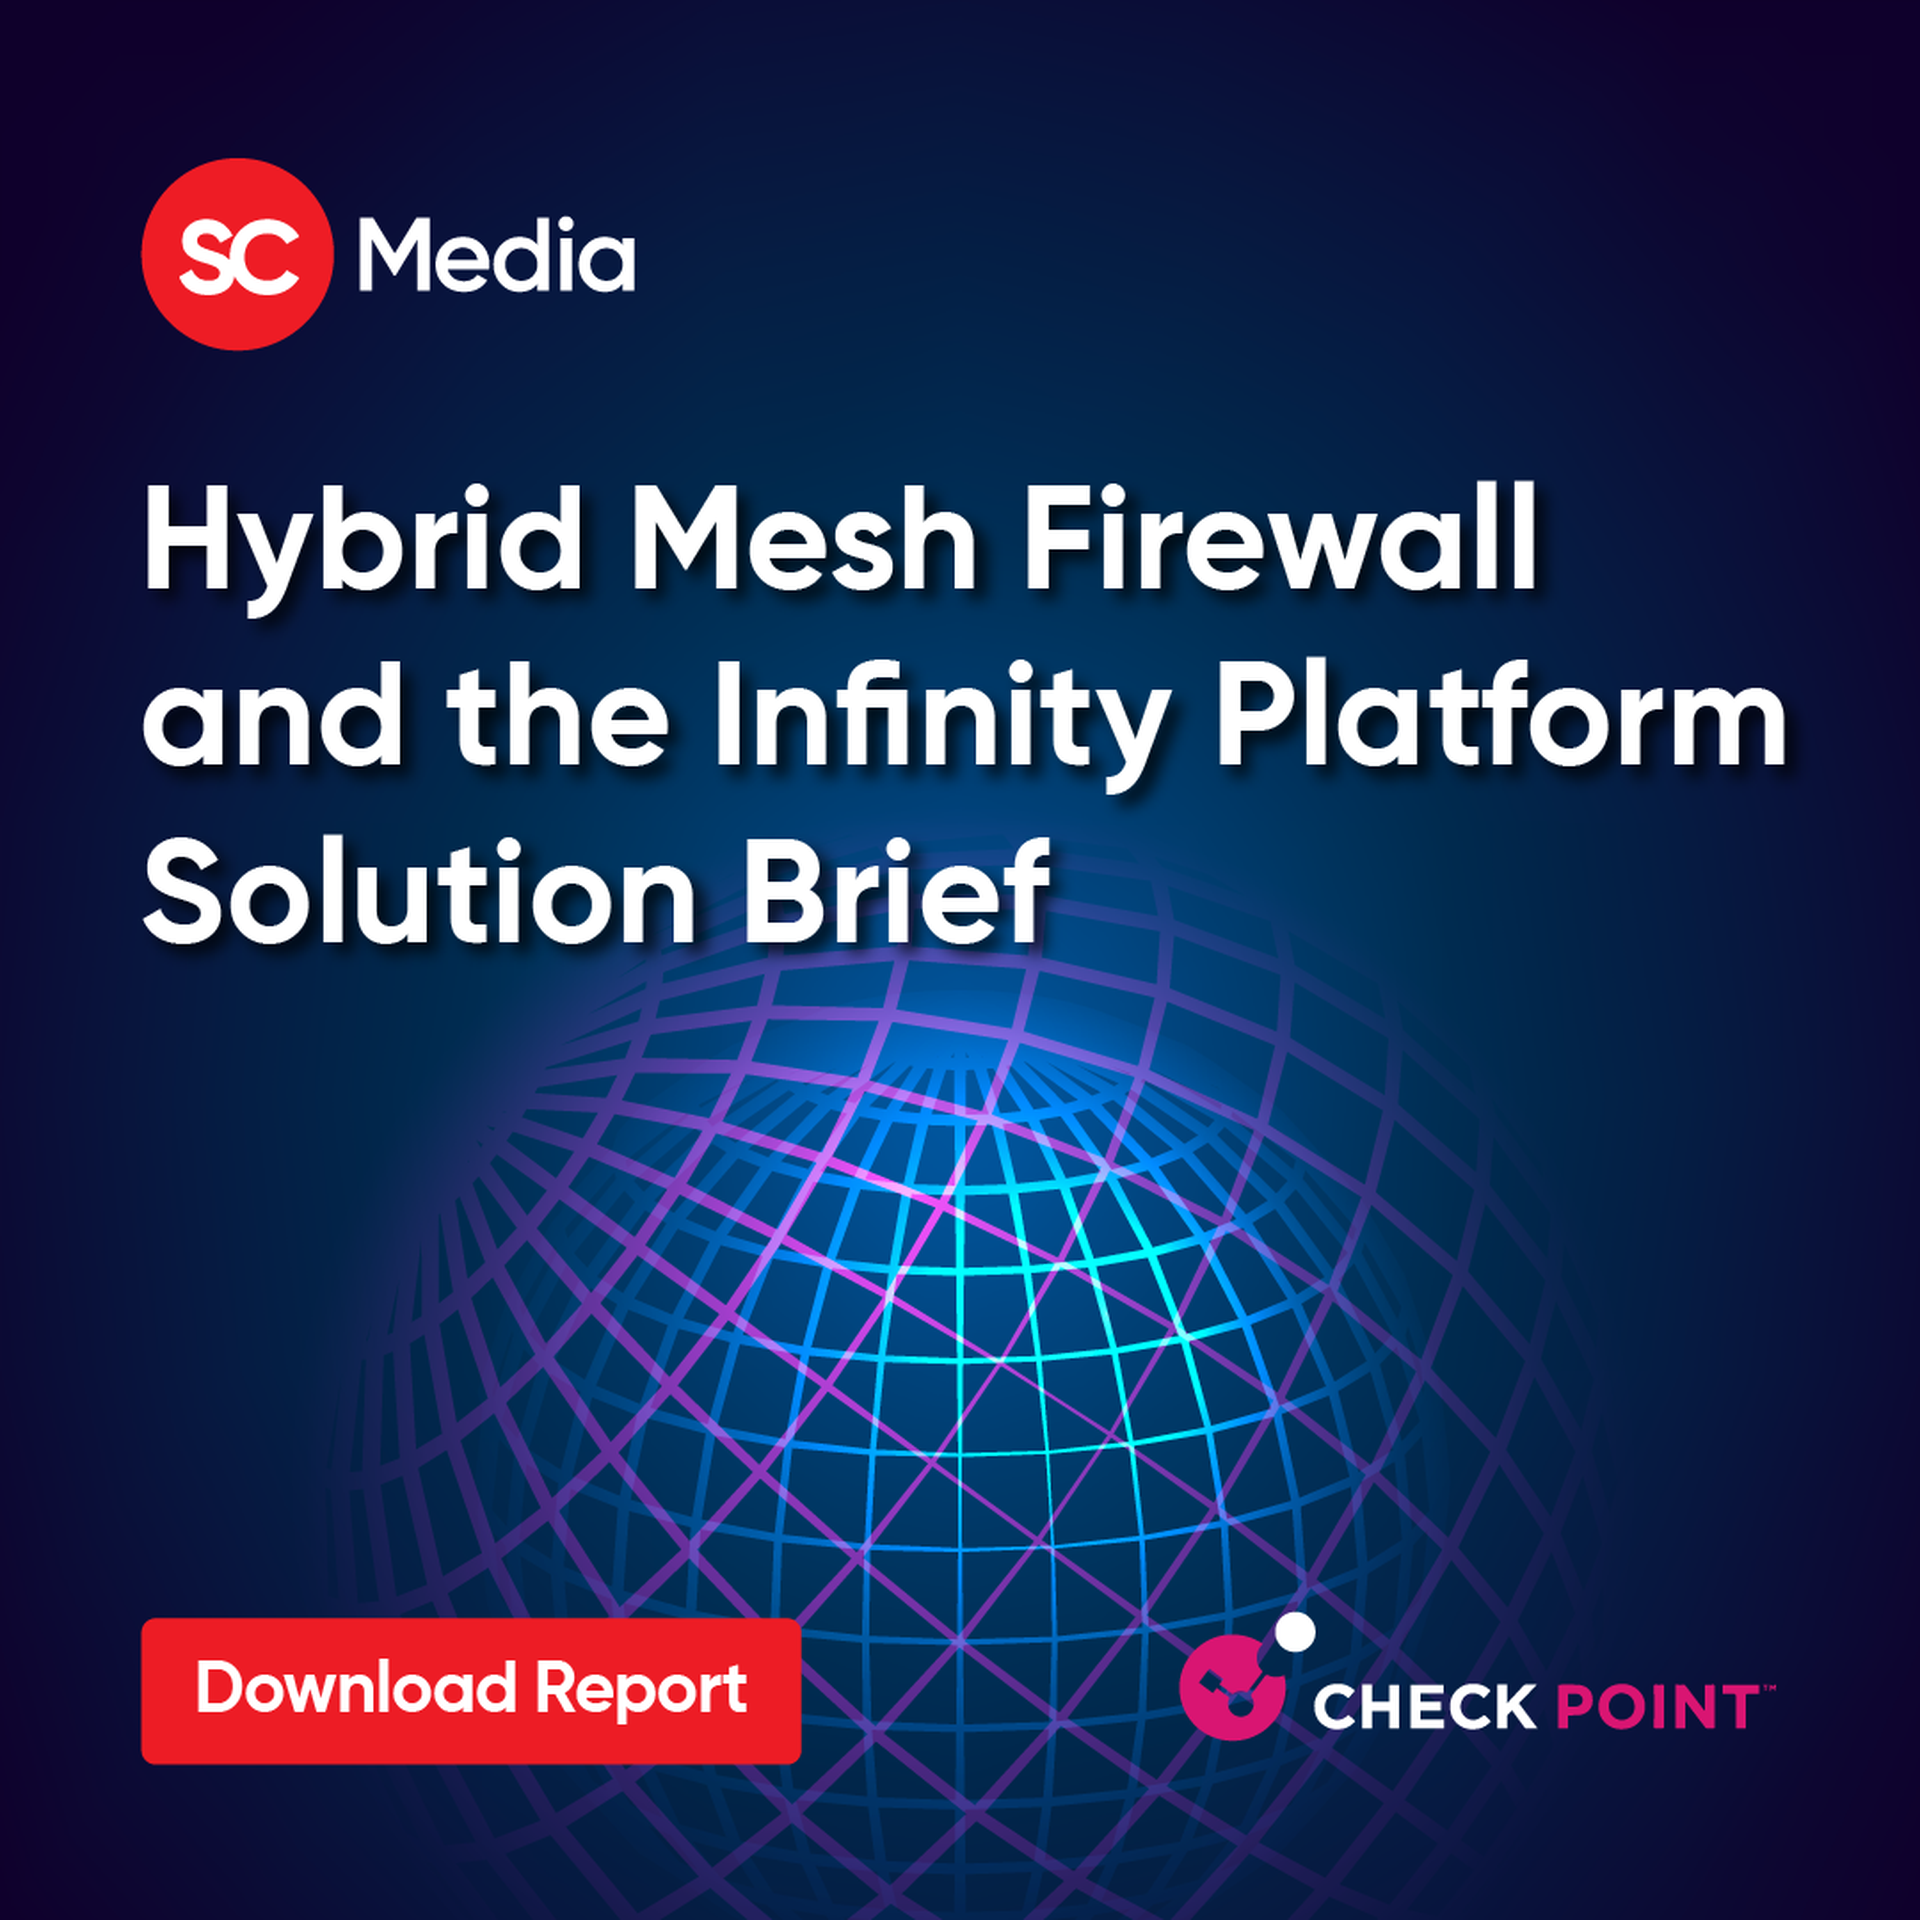 Hybrid Mesh Firewall and the Infinity Platform Solution Brief